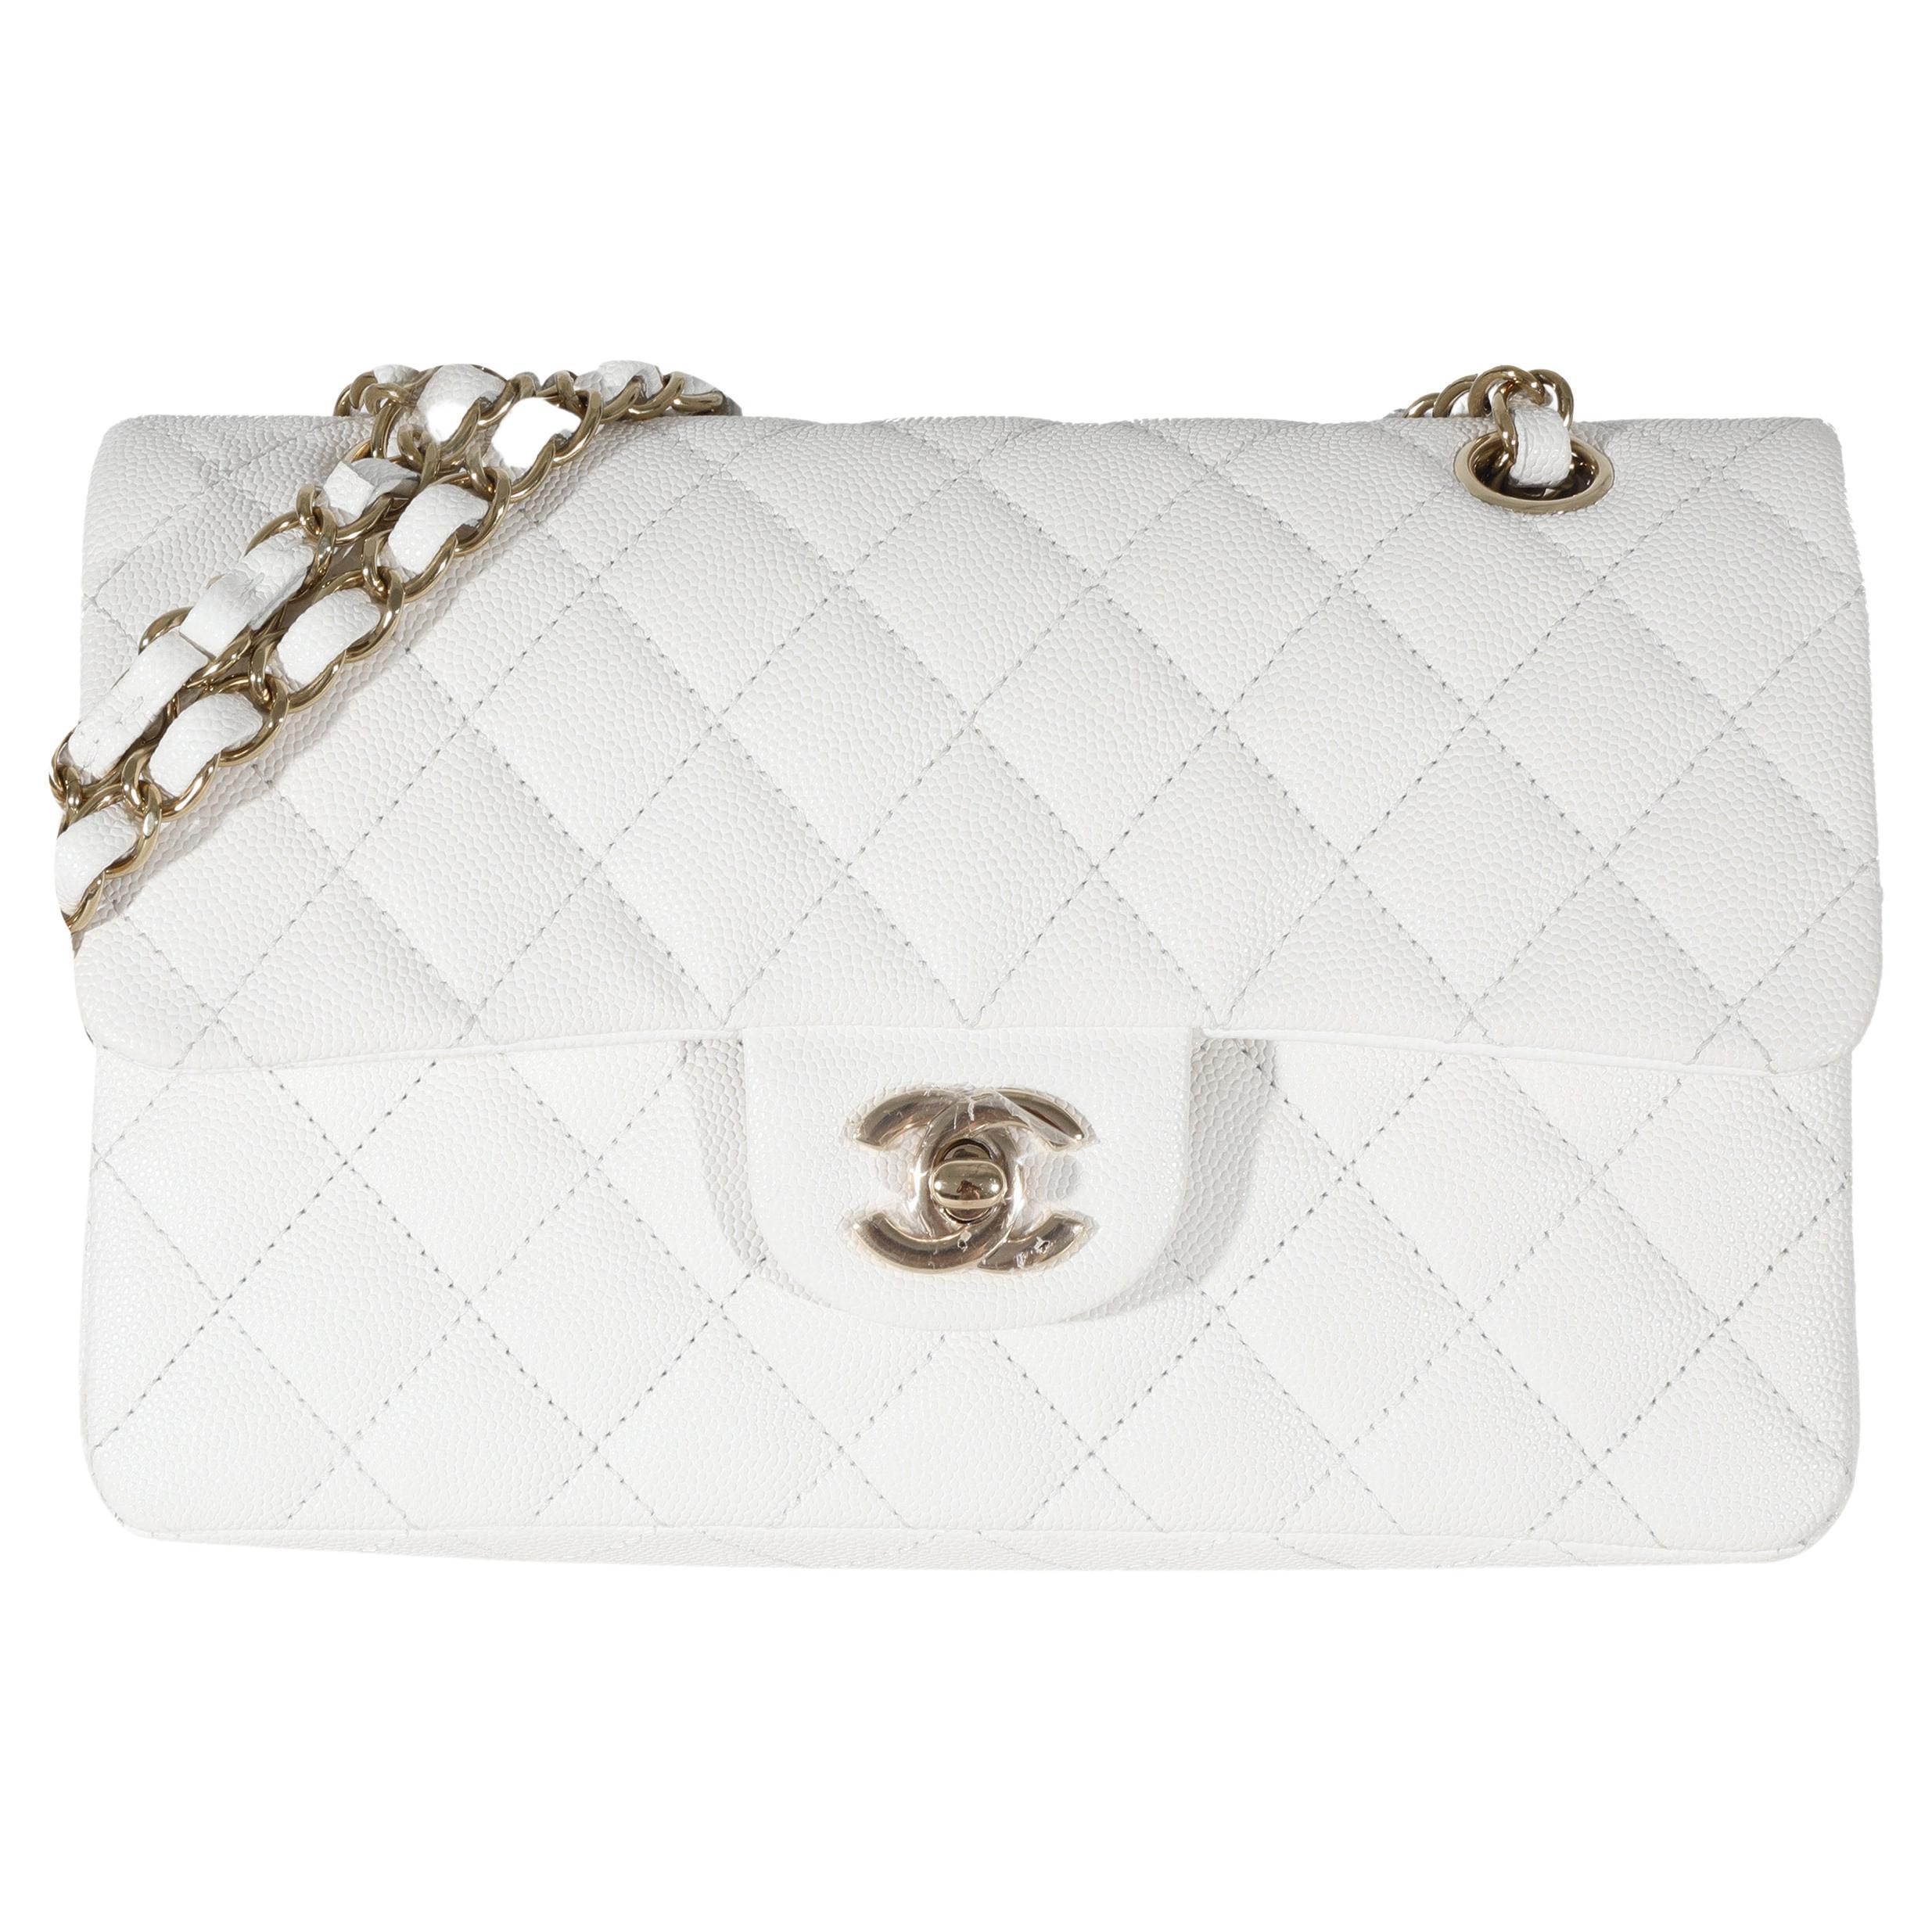 Chanel Classic Flap White - 89 For Sale on 1stDibs